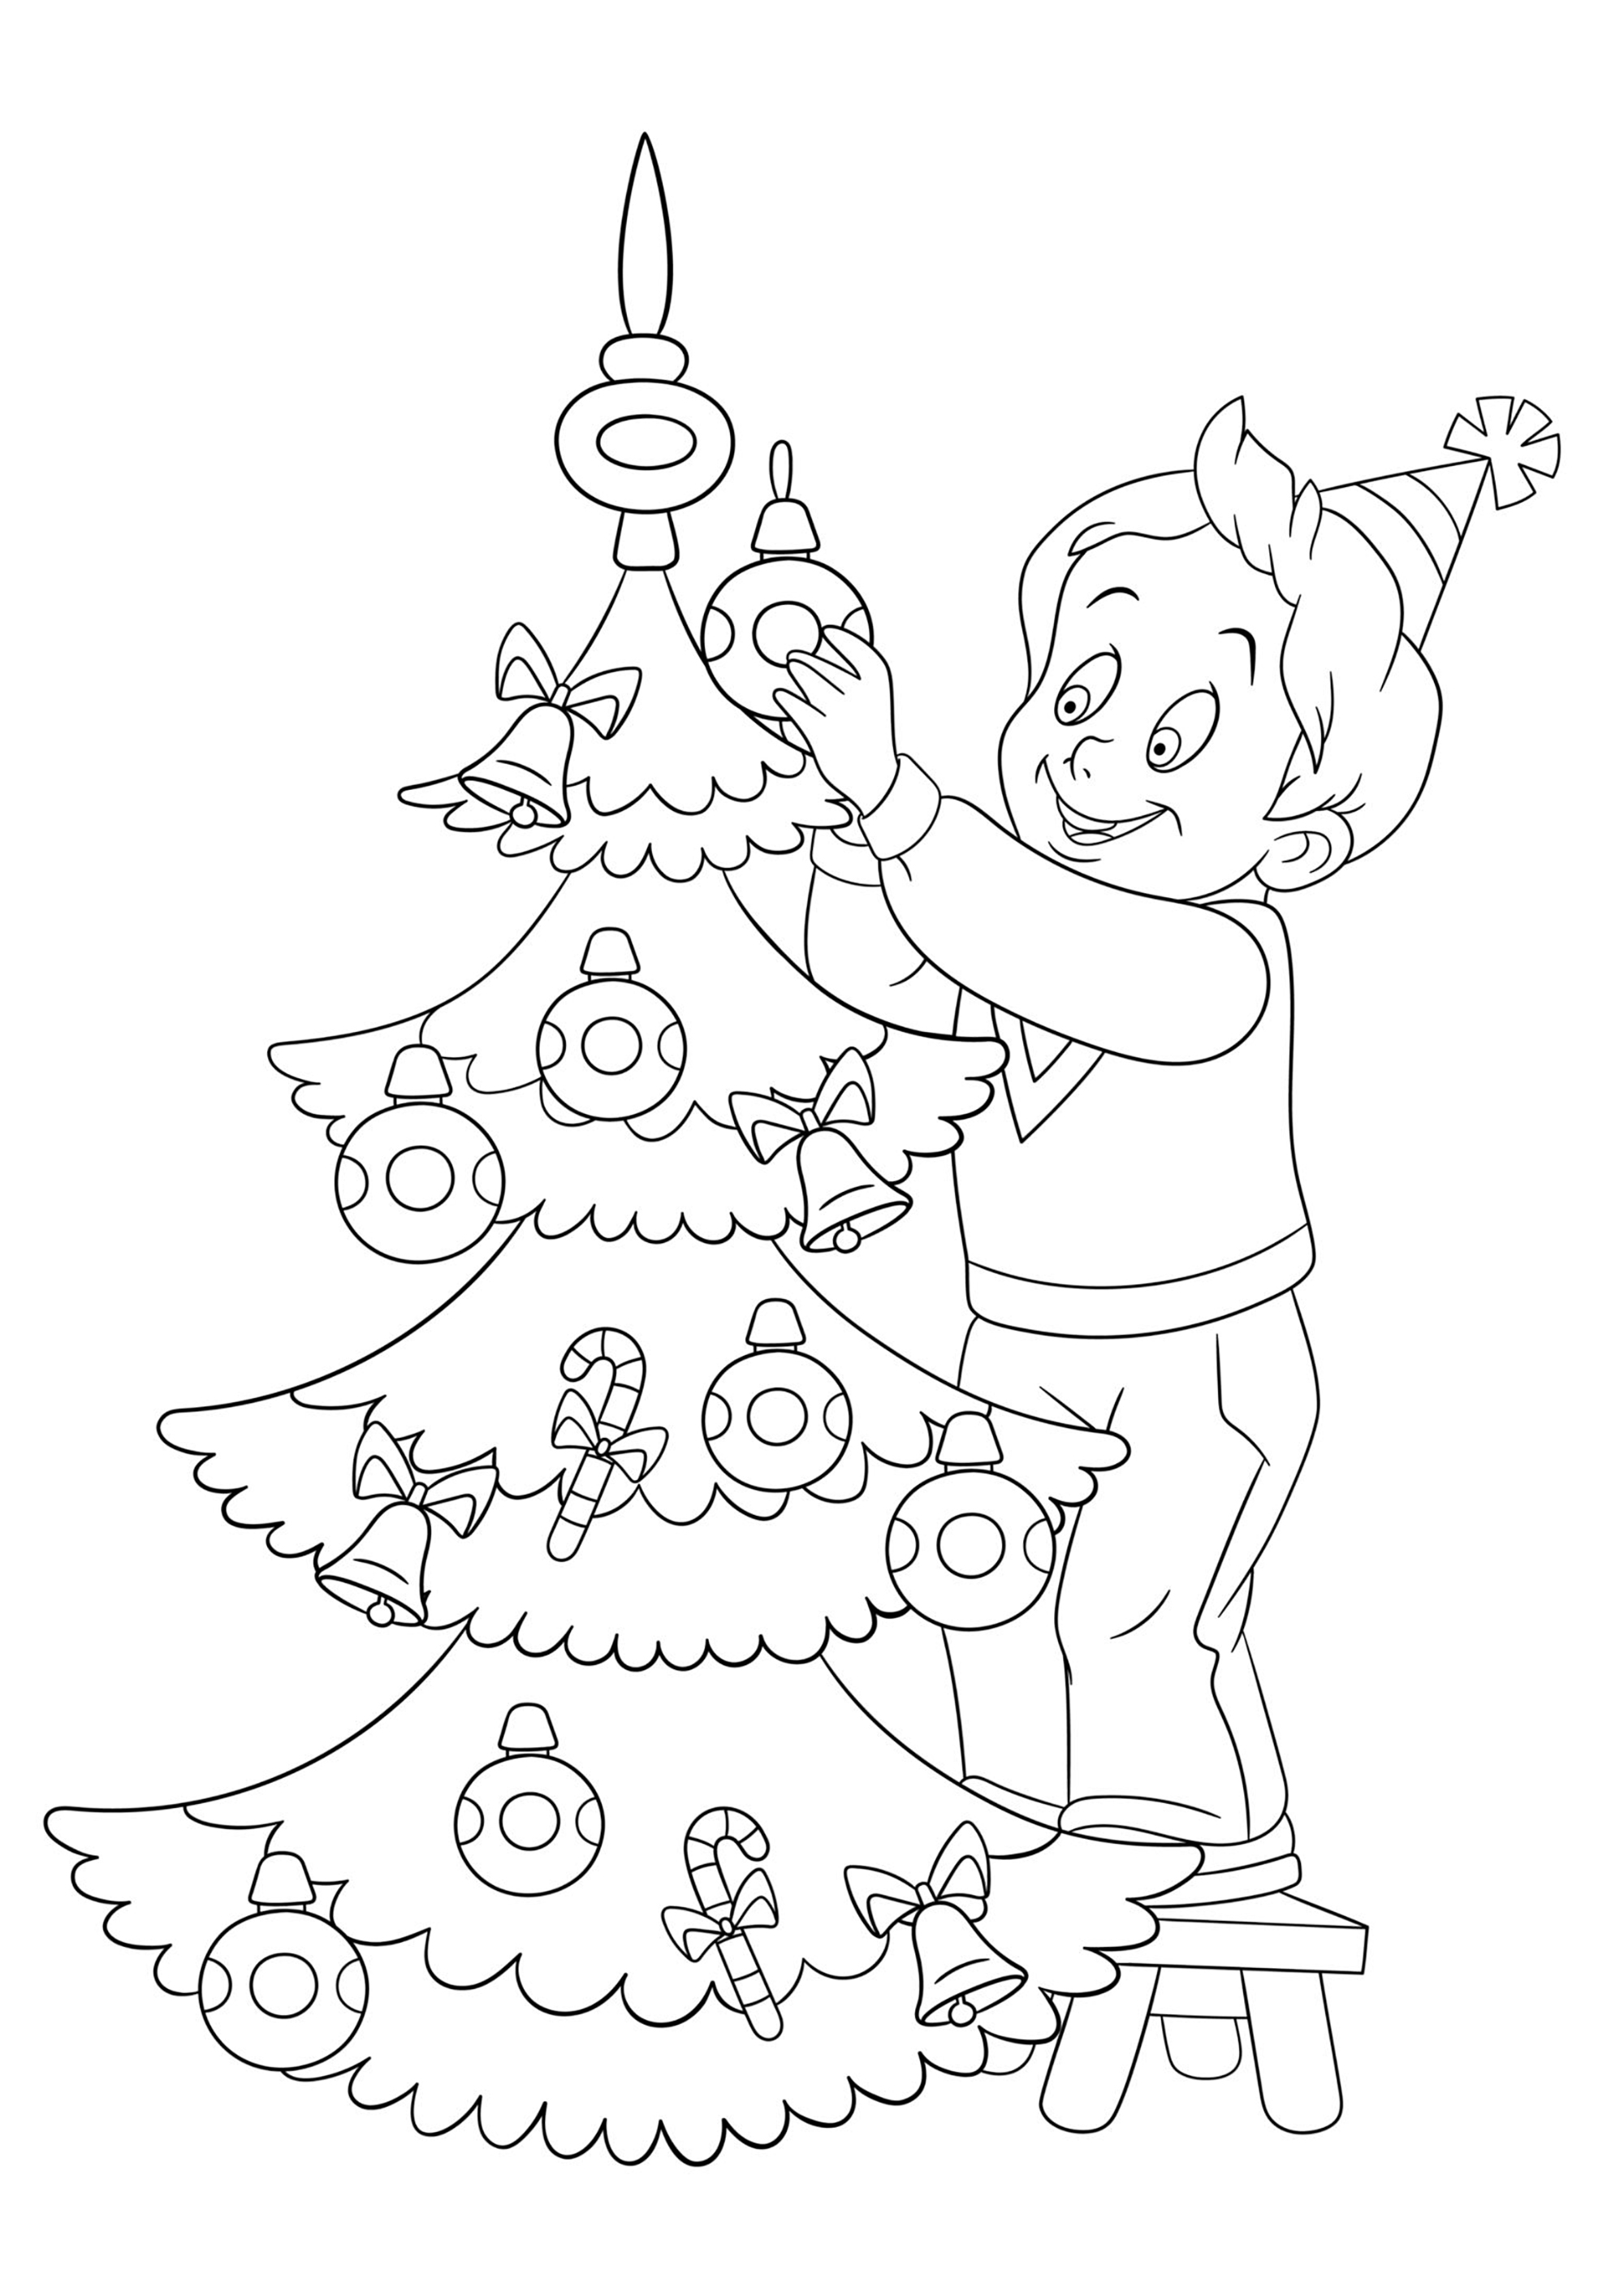  Christmas  for children  Christmas  Kids  Coloring  Pages